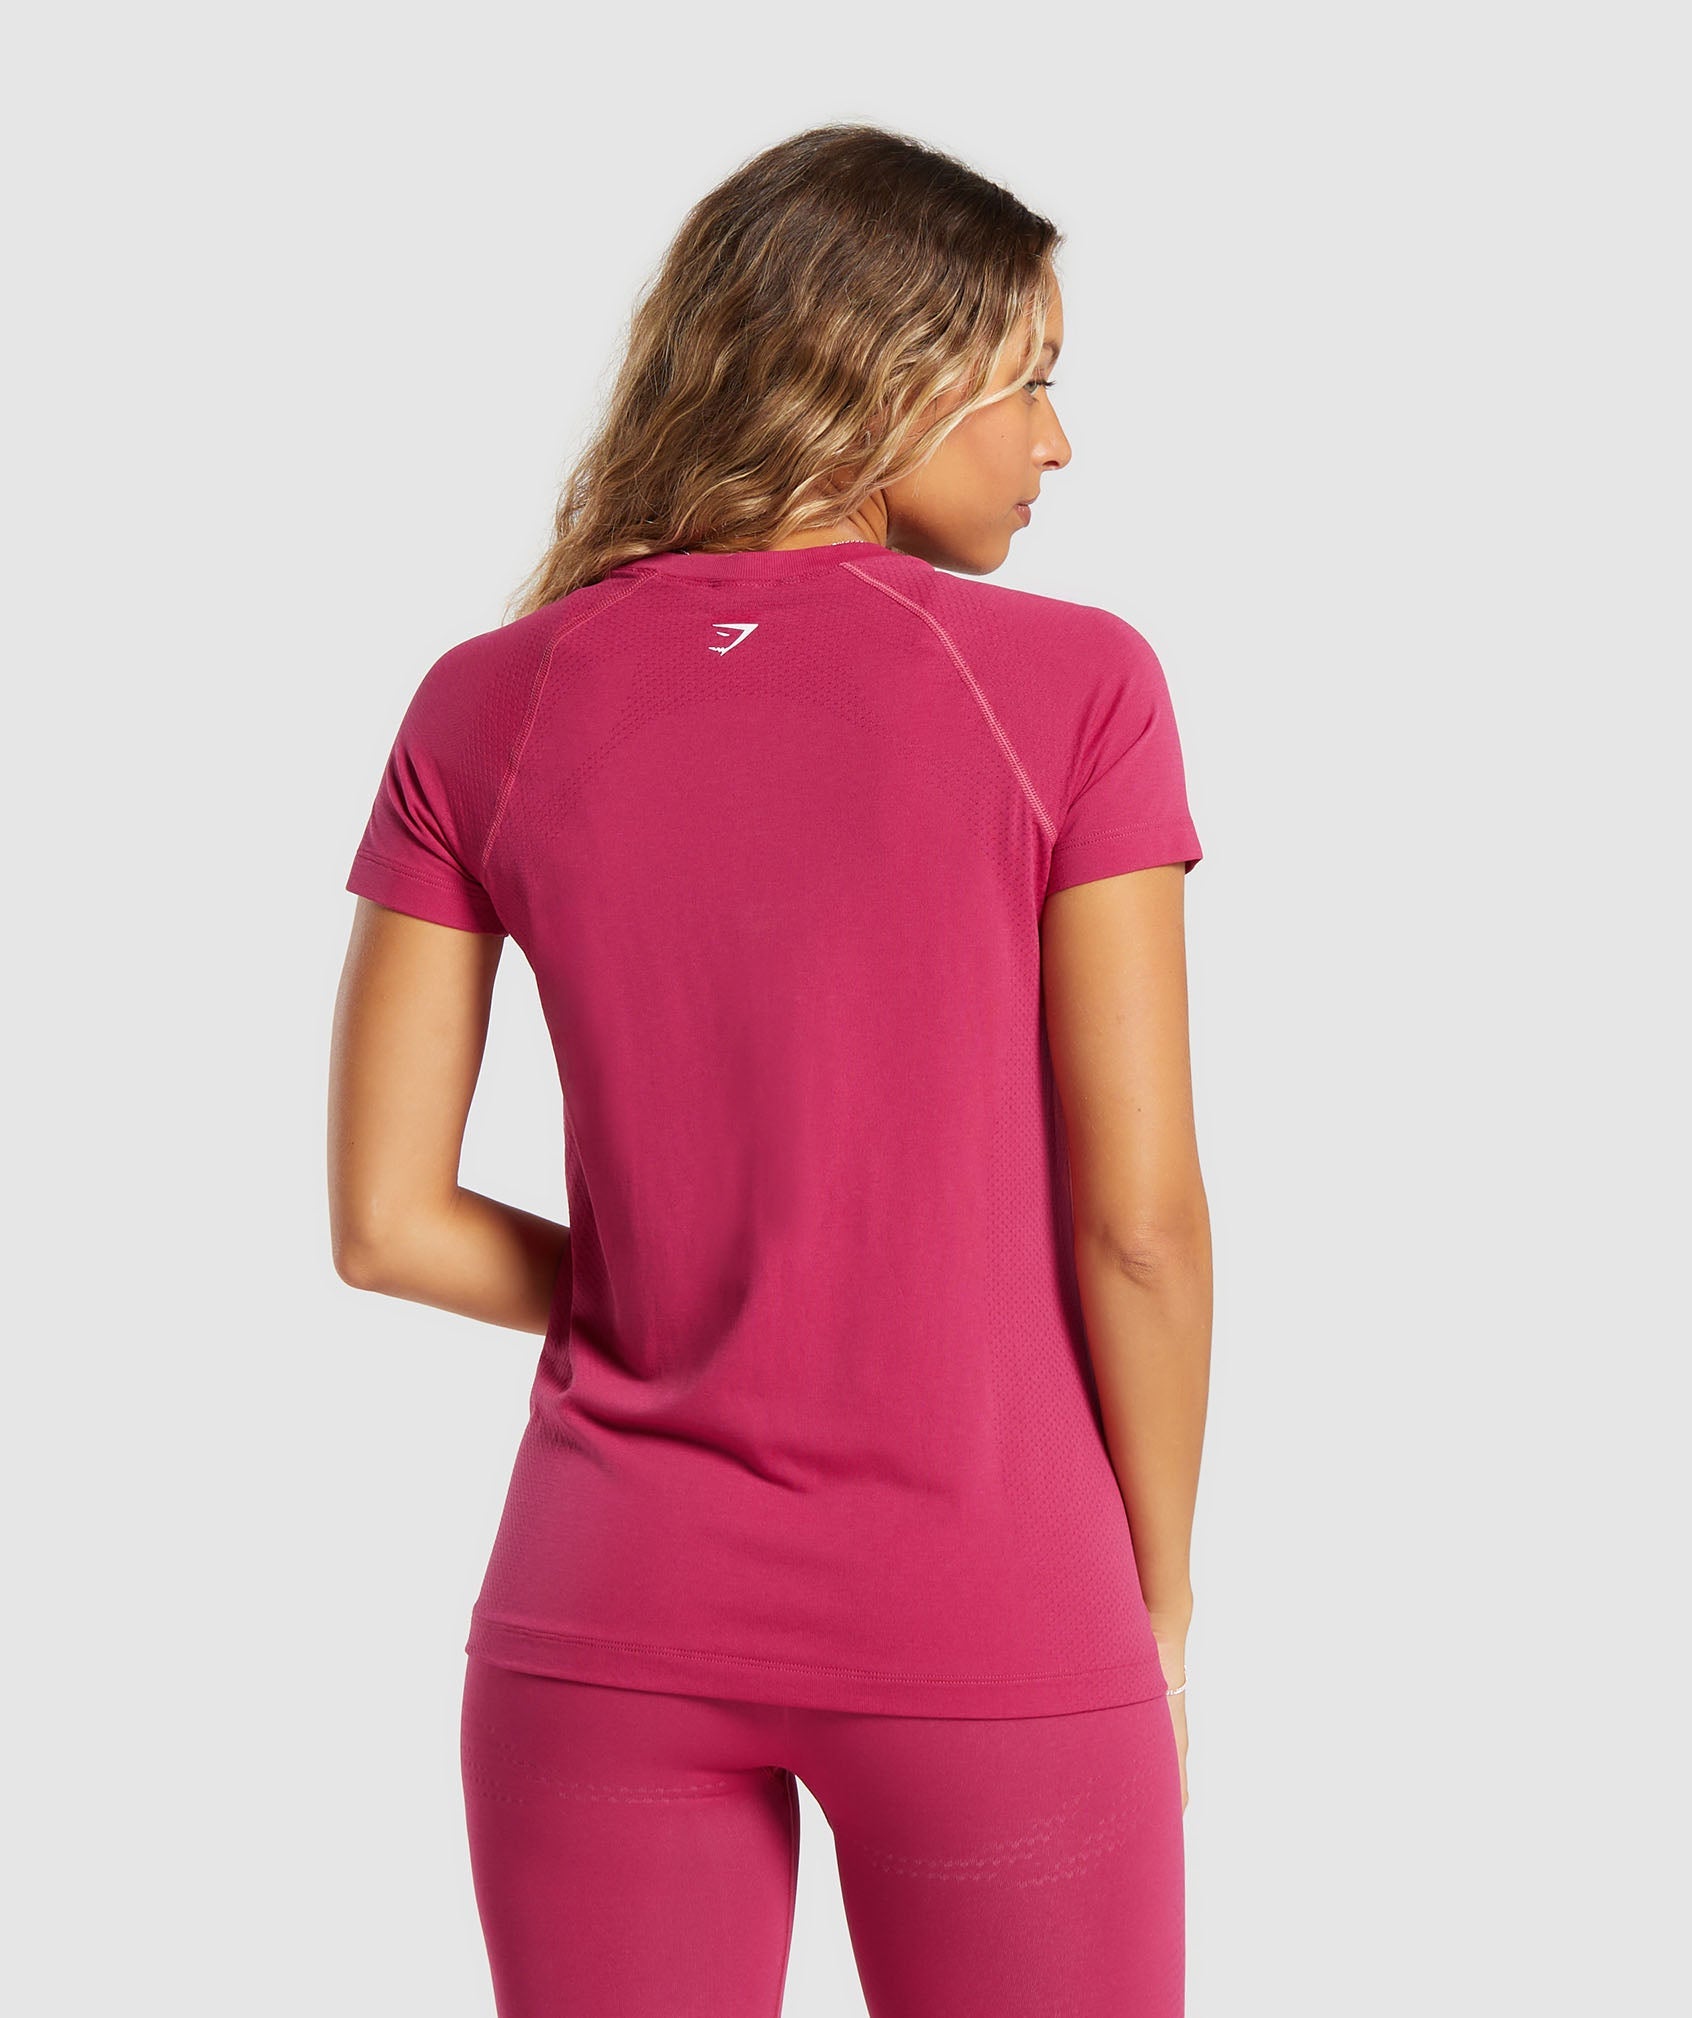 Vital Seamless 2.0 Light T-Shirt in Vintage Pink/Marl - view 2